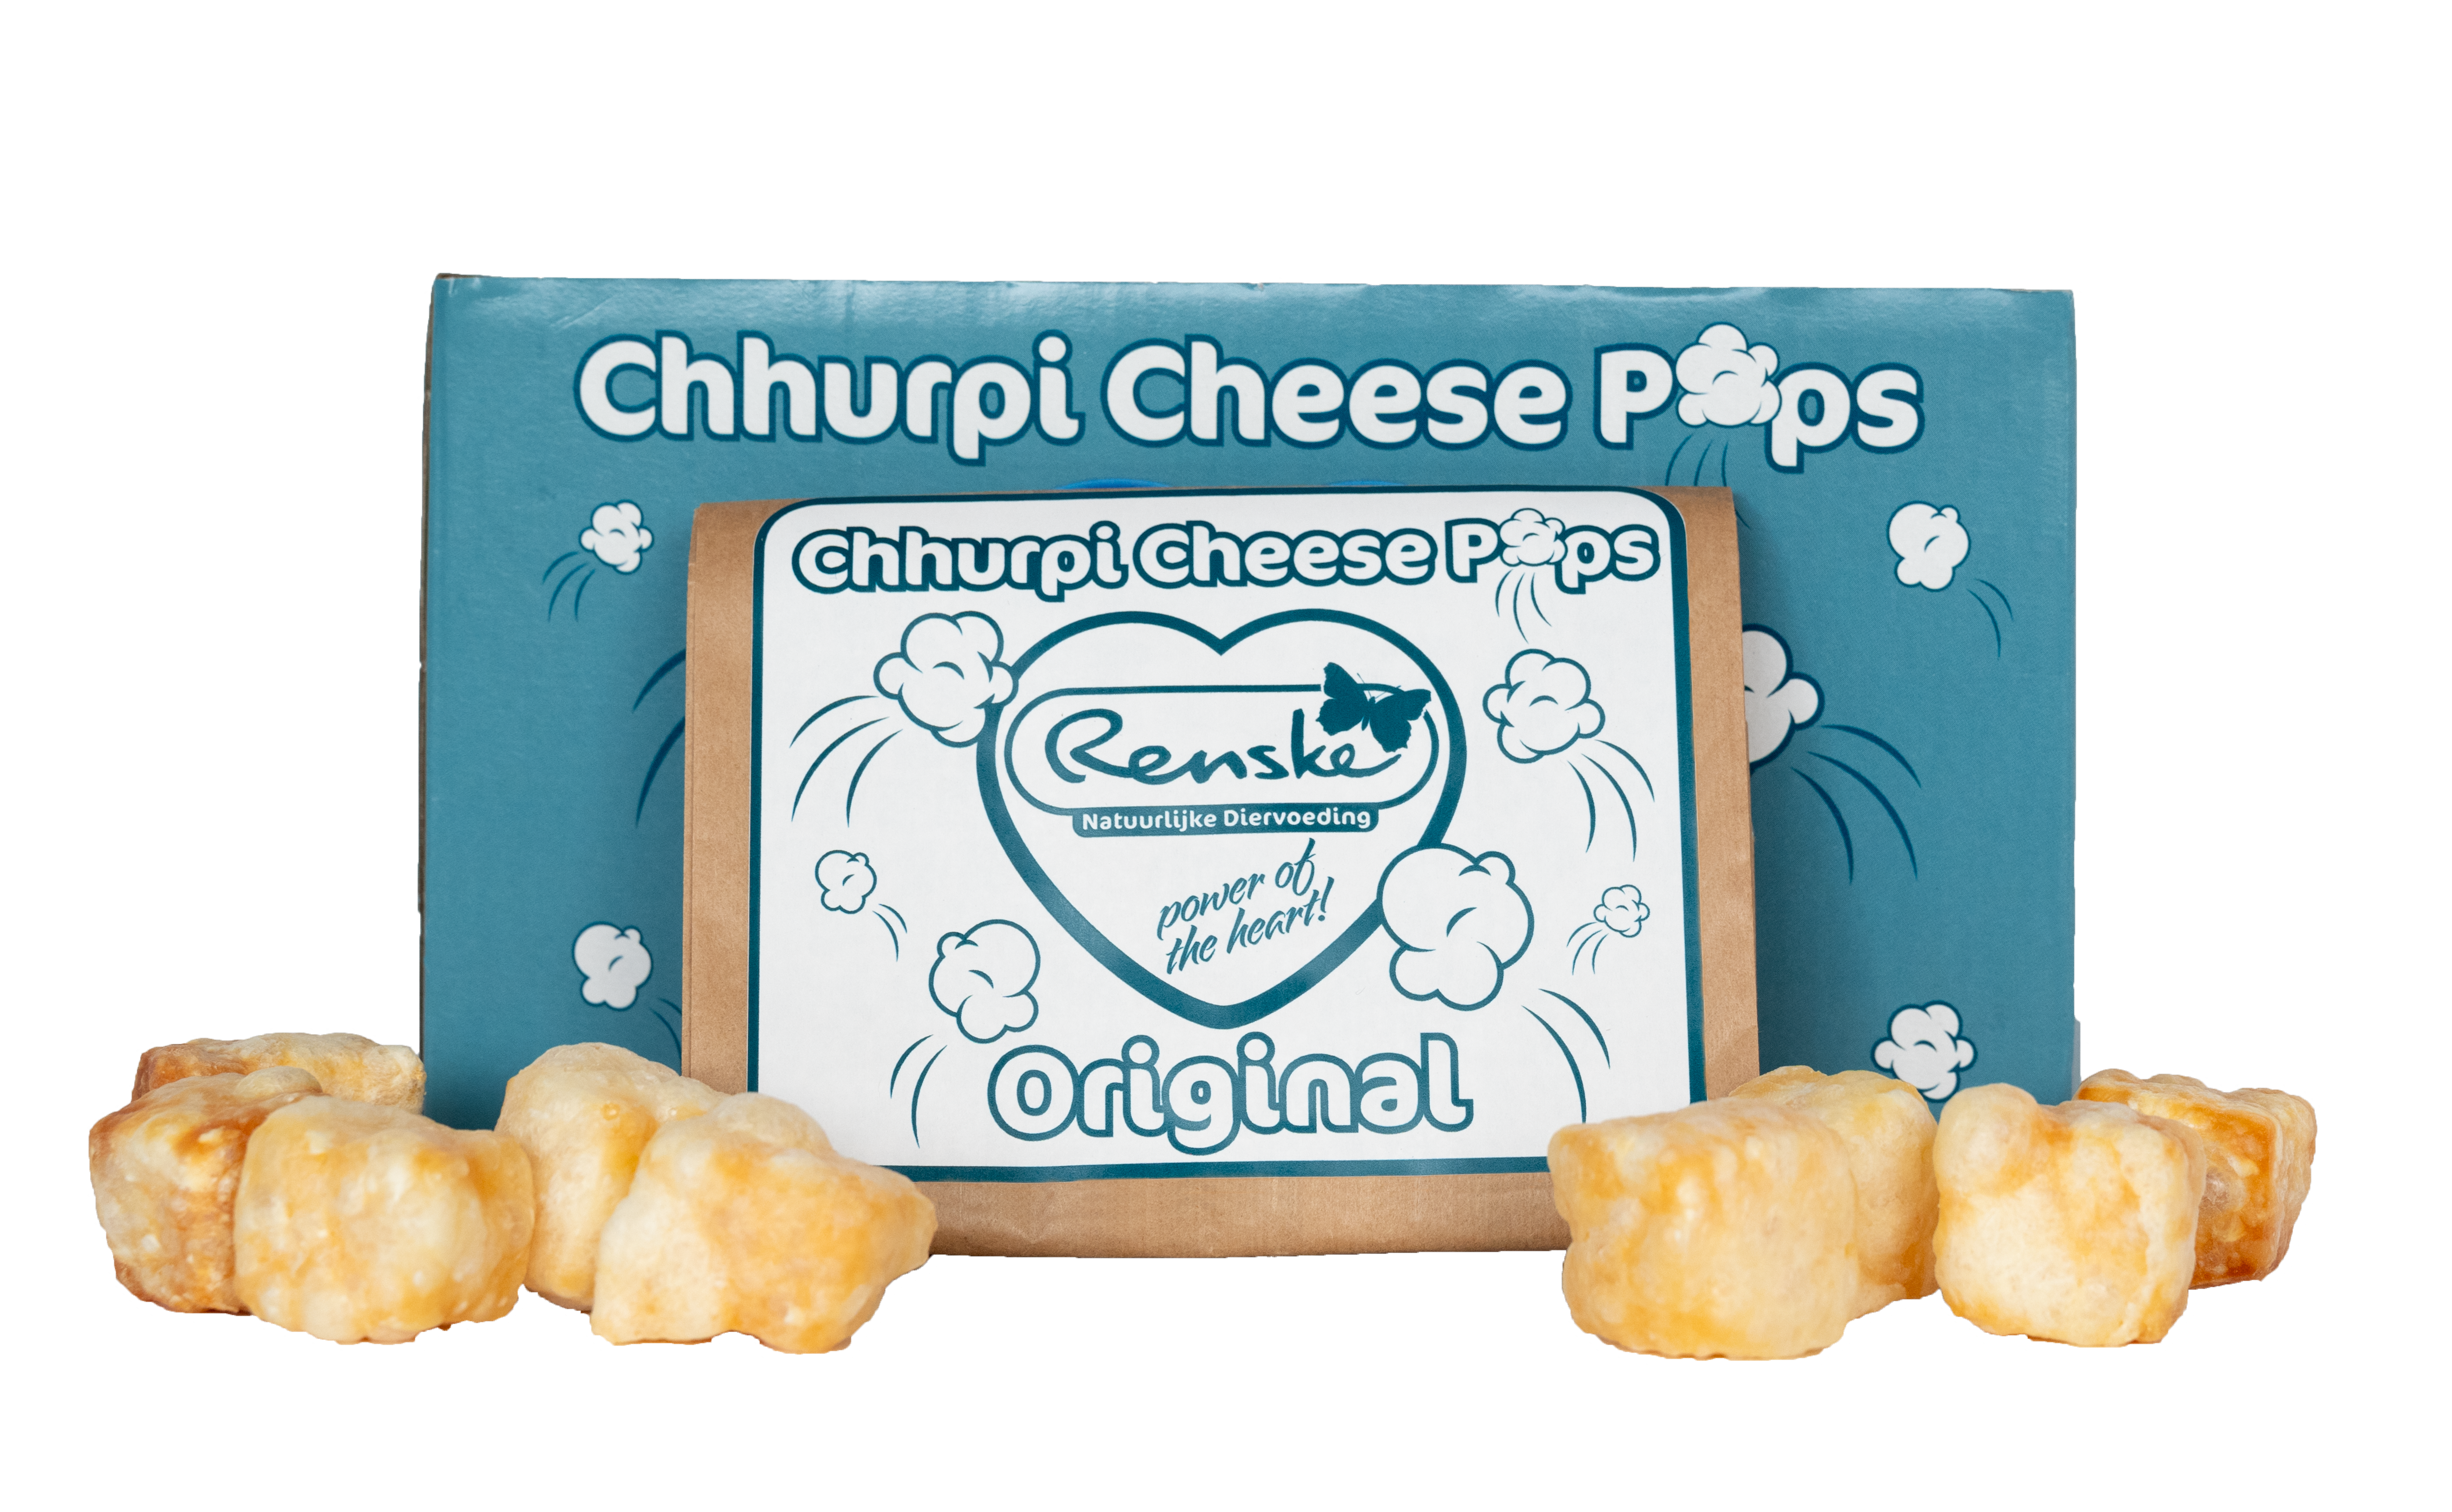 Losstaand-product-shot-Chhurpi-Cheese-Pops